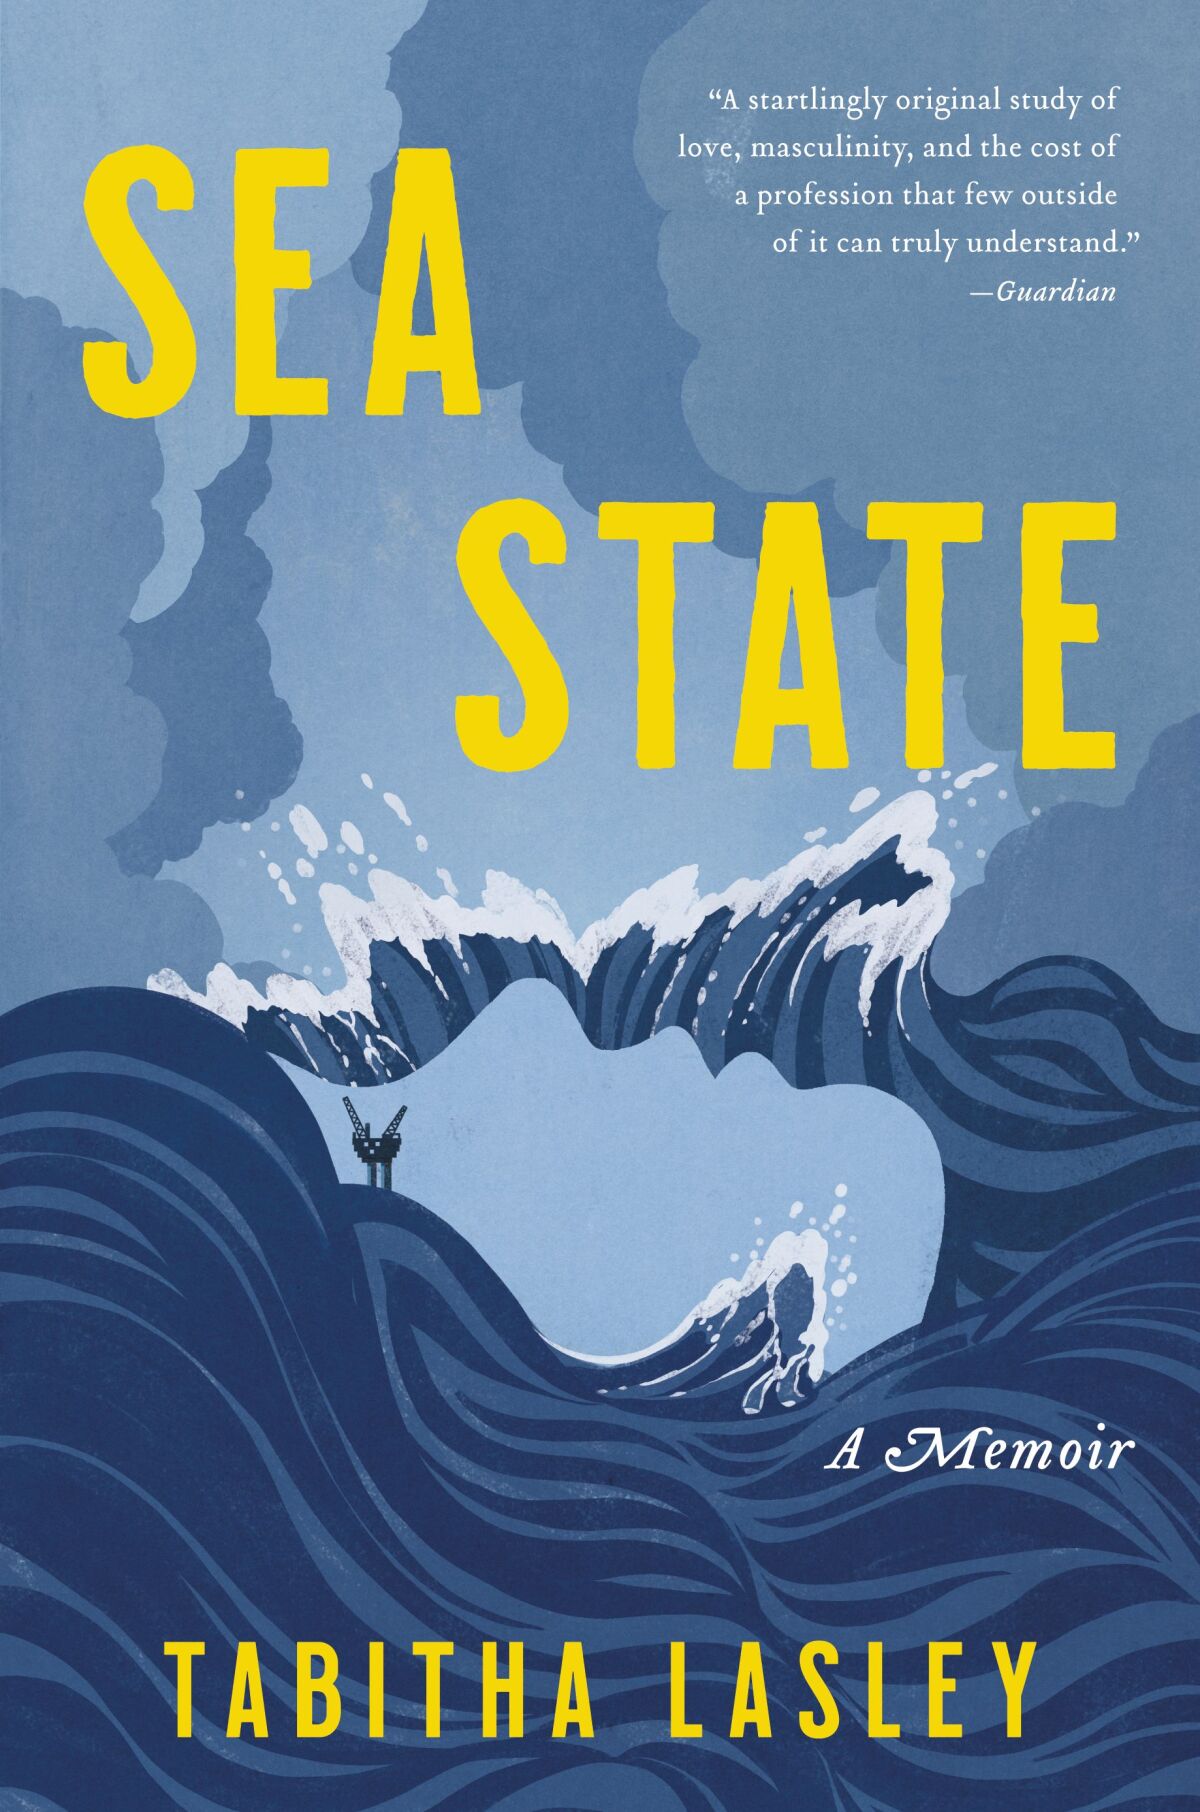 The cover of the book "Sea State," by Tabitha Lasley, shows big blue waves.